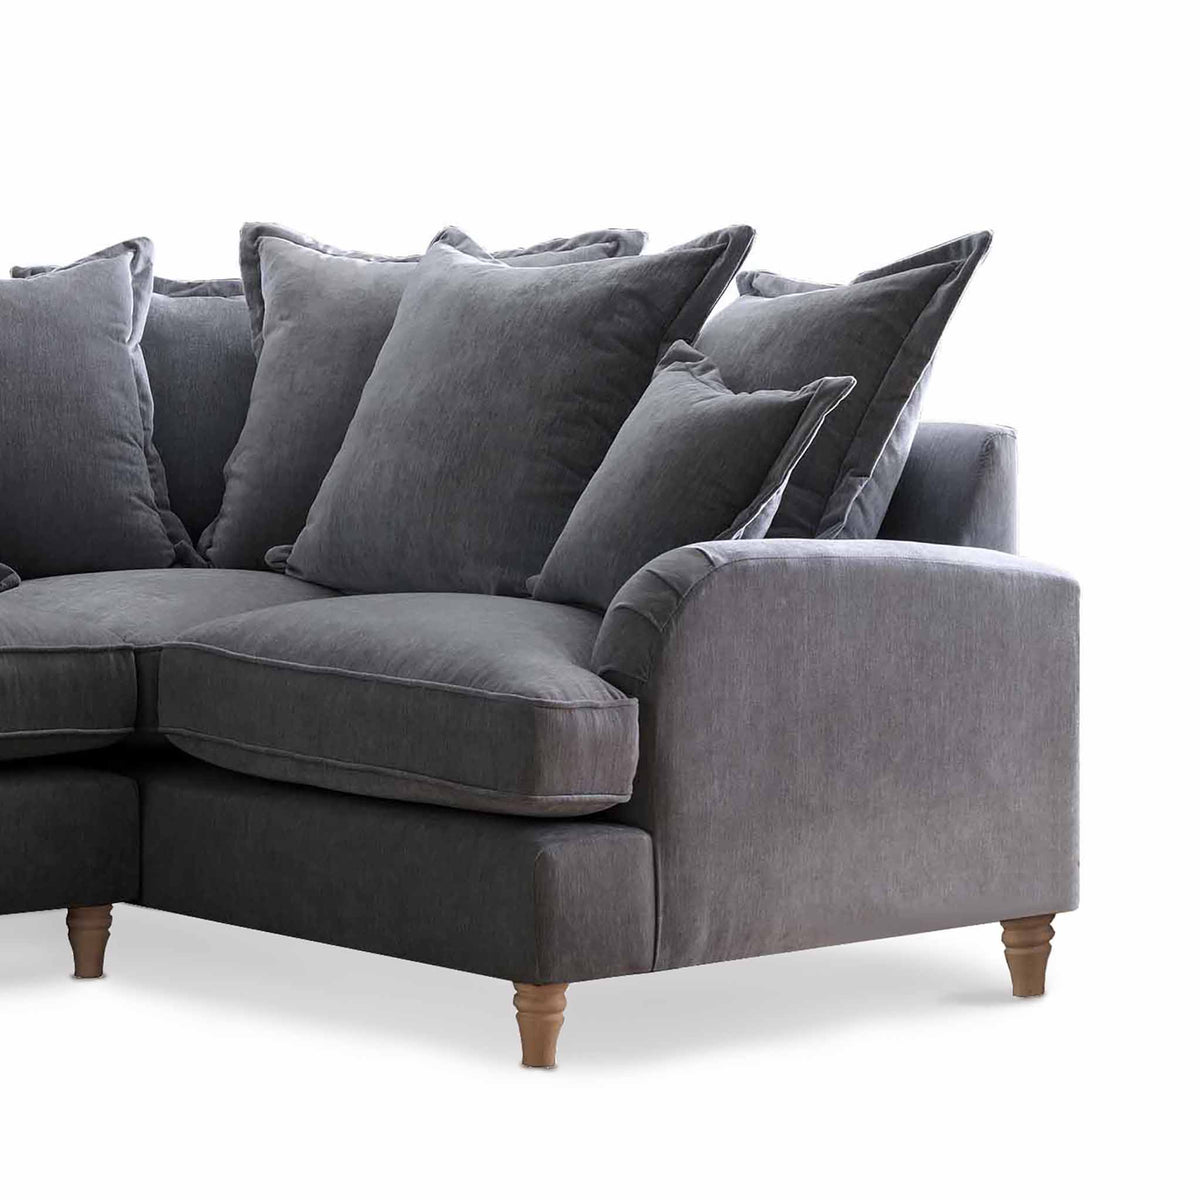 Rupert Charcoal Grey 2 Corner 1 Right Hand Sofa Couch